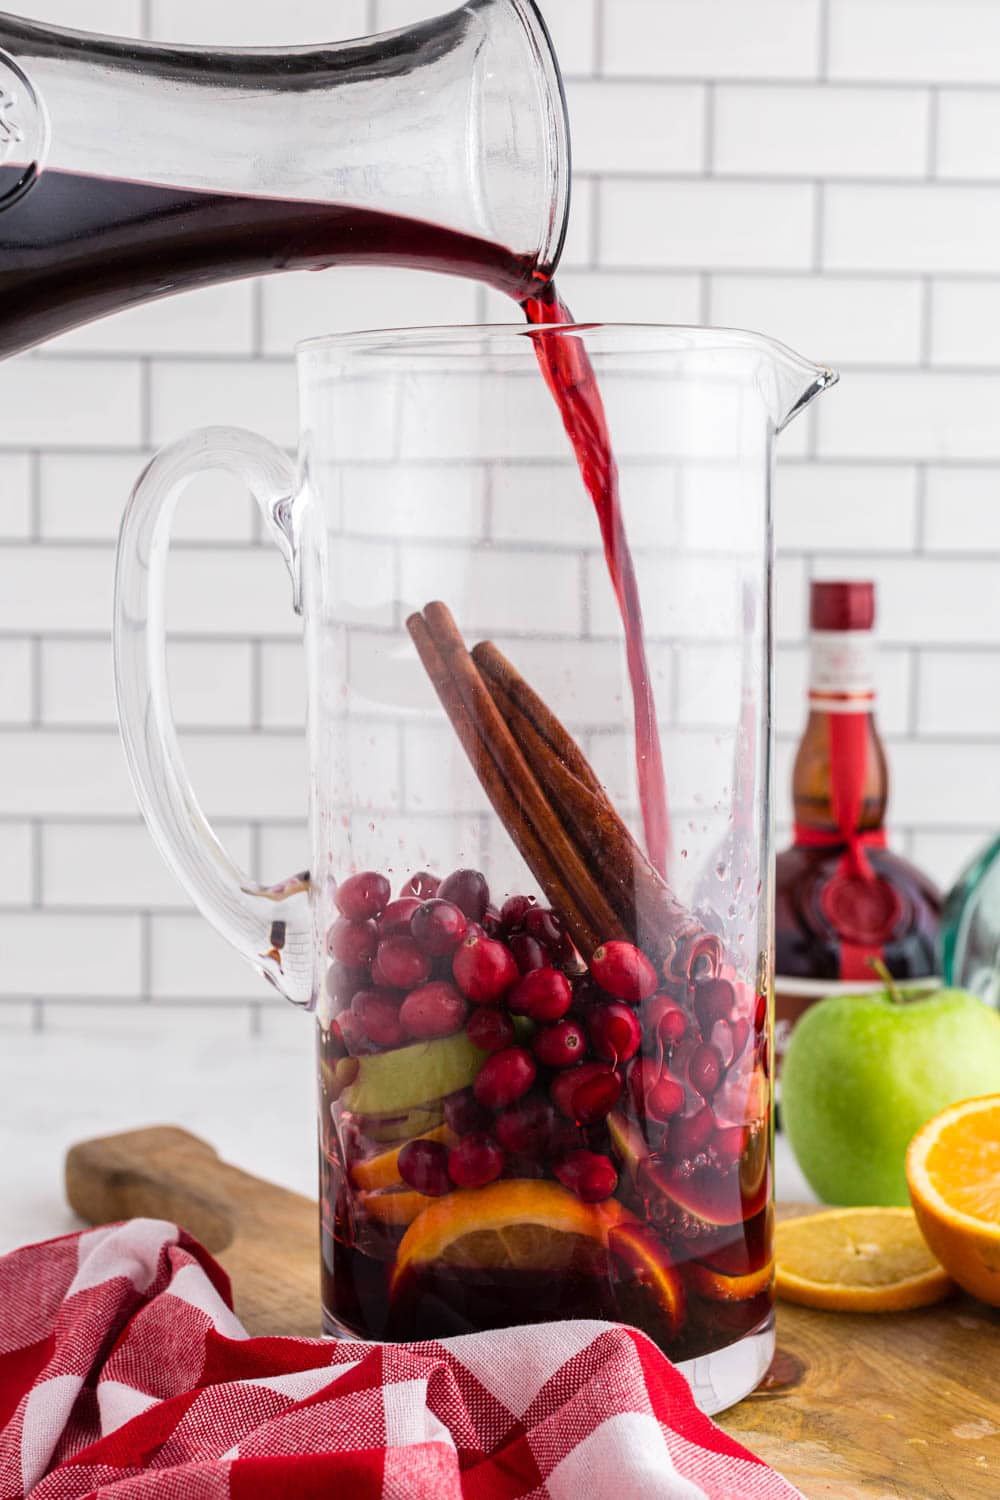 Glass decanter filled with red wine getting emptied into a glass pitcher filled with cranberries, cinnamon sticks, sliced apples and oranges, half an orange on a wooden kitchen board, red and white checked linen, a bottle of Grand Marnier, white subway tiles as background.